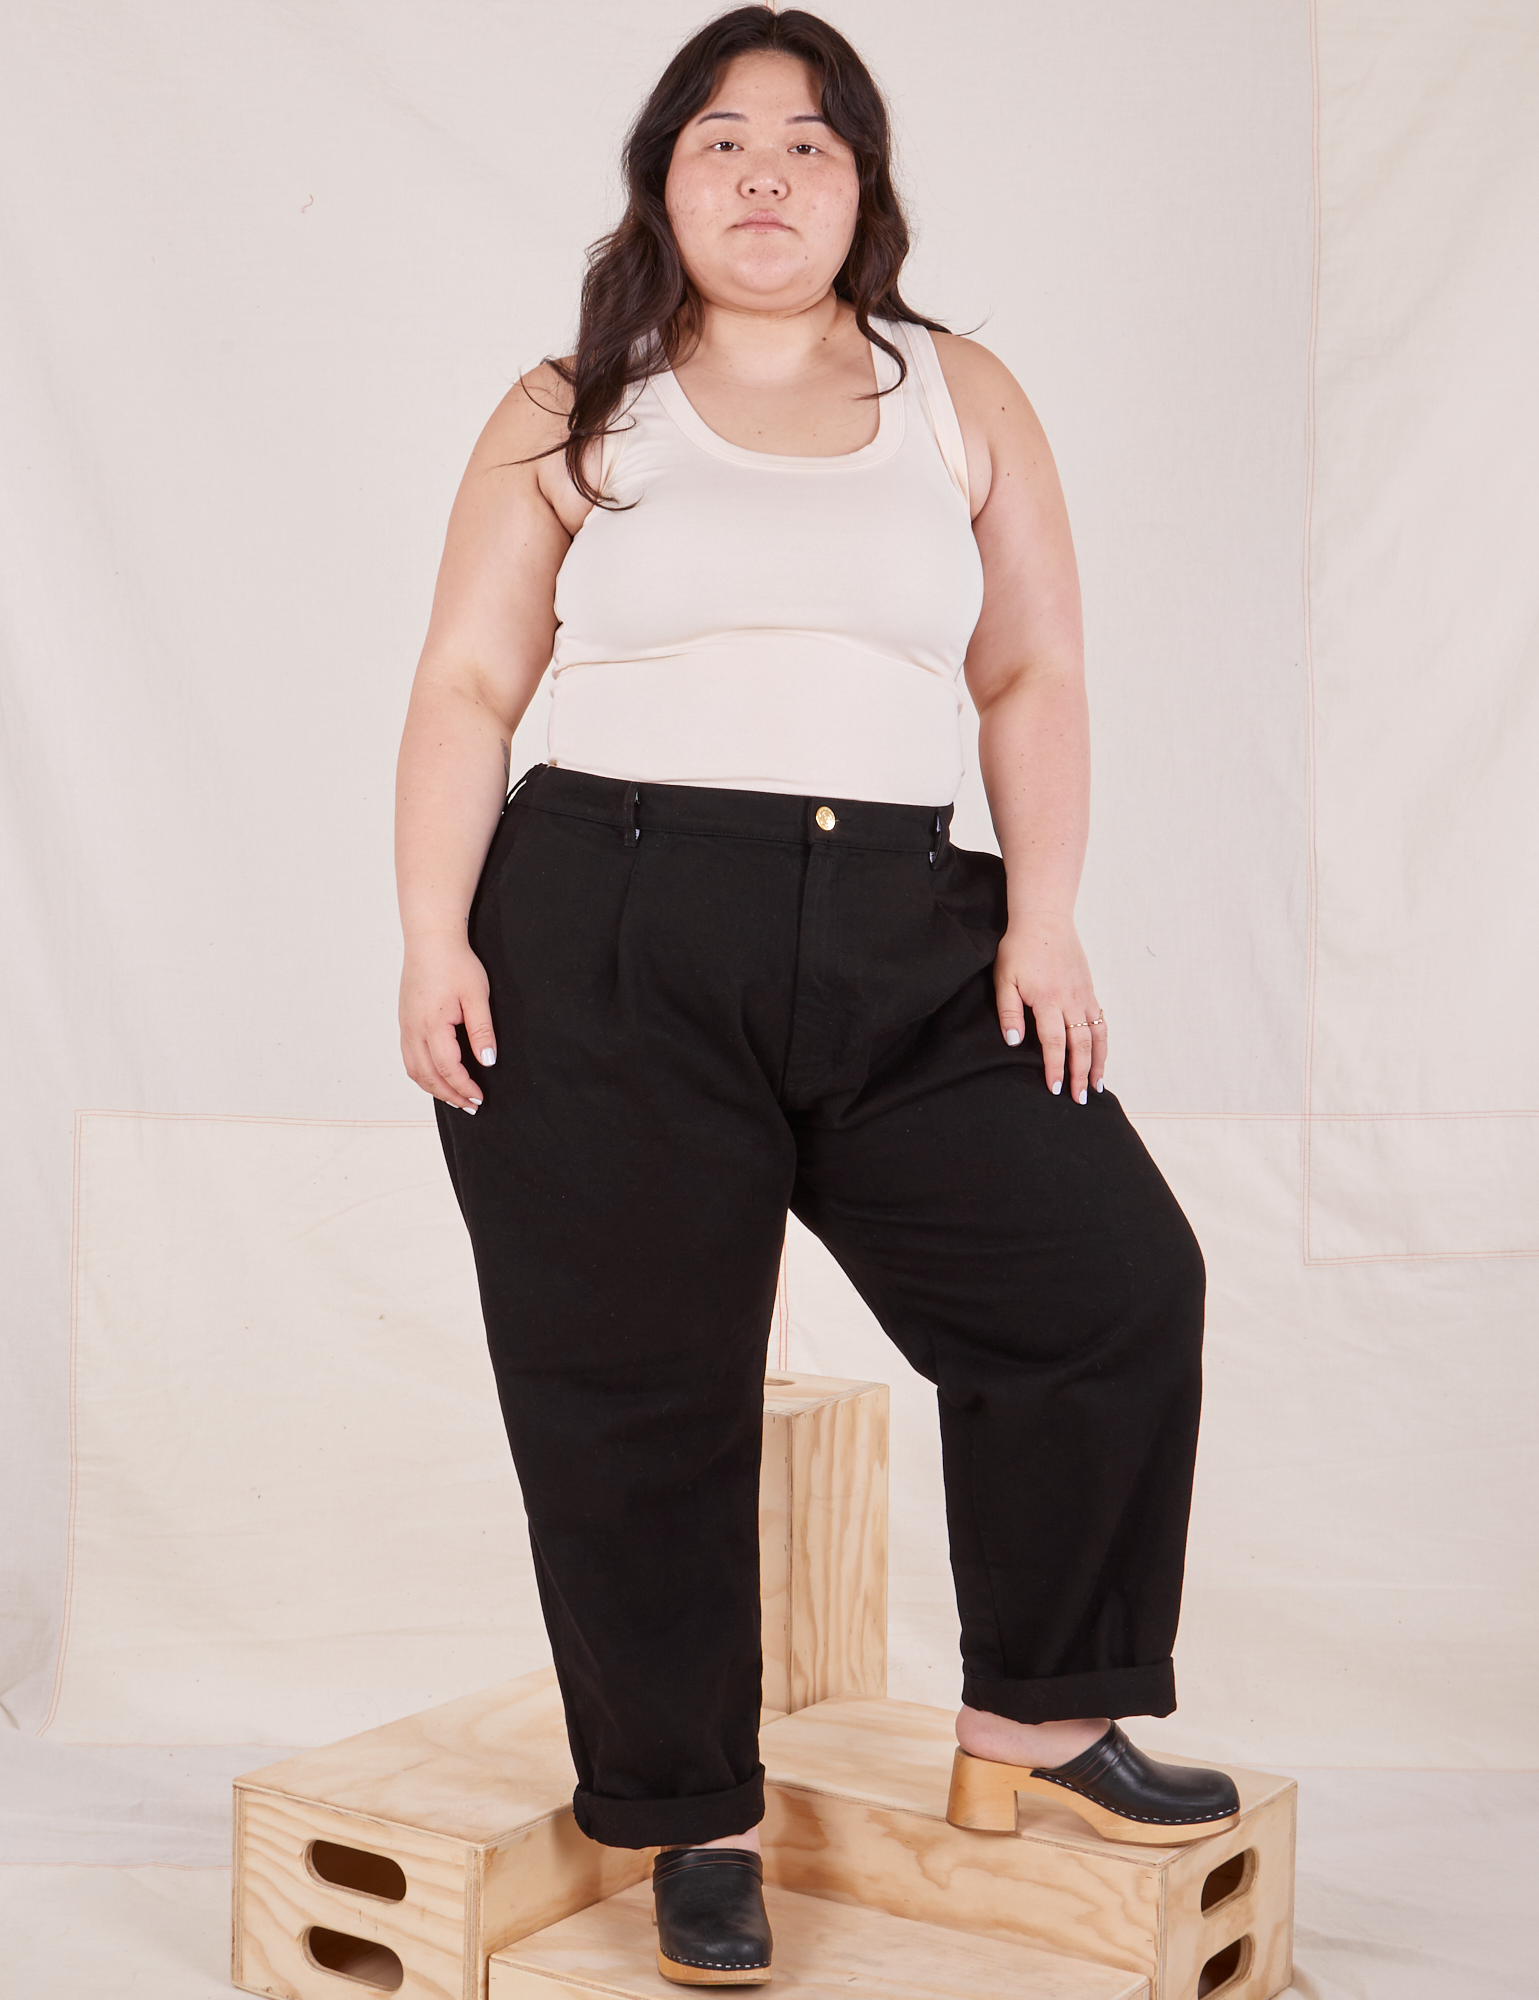 Ashley is 5&#39;7&quot; and wearing 1XL Denim Trouser Jeans in Black paired with Tank Top vintage tee off-white